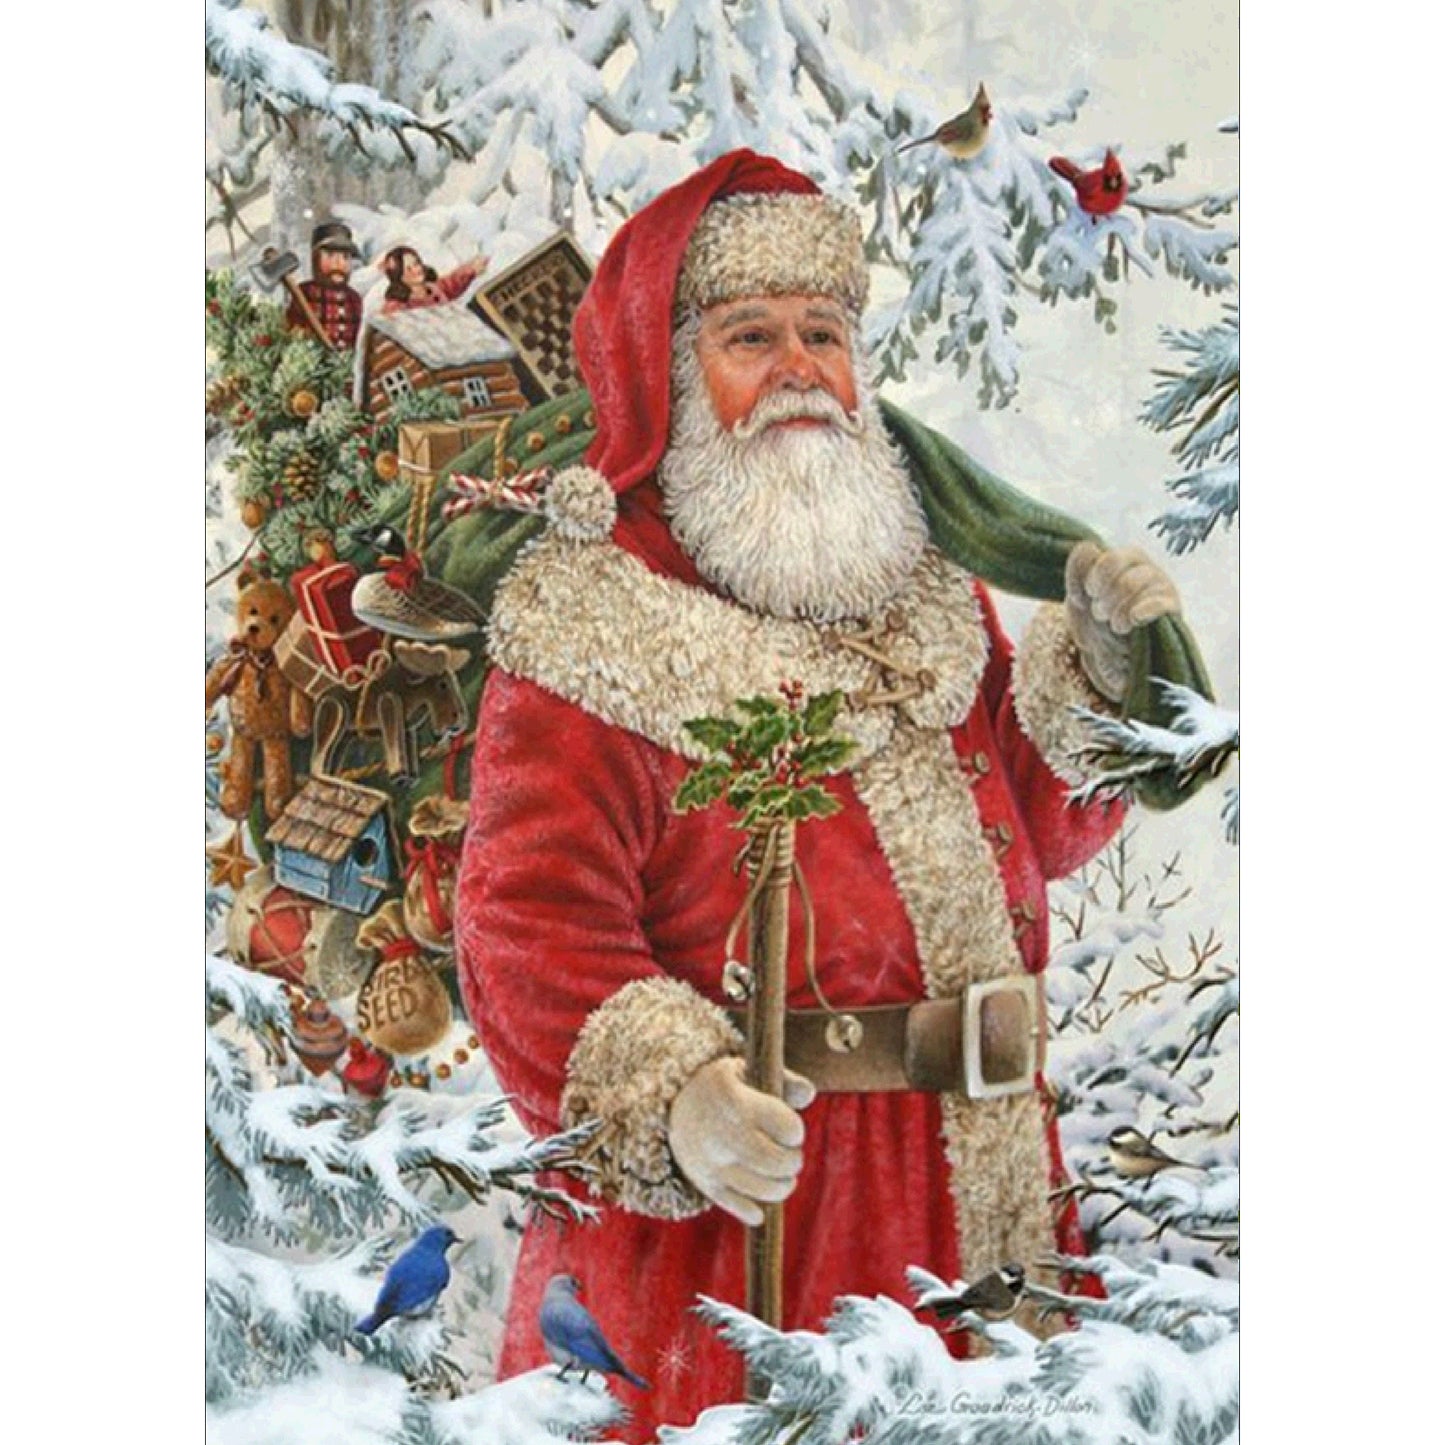 4 Sets Christmas Santa Claus 5D Full Drill Diamond Painting Embroidery for Cross Stitch Kits DIY for Rhinestone Crystal Home Decoration